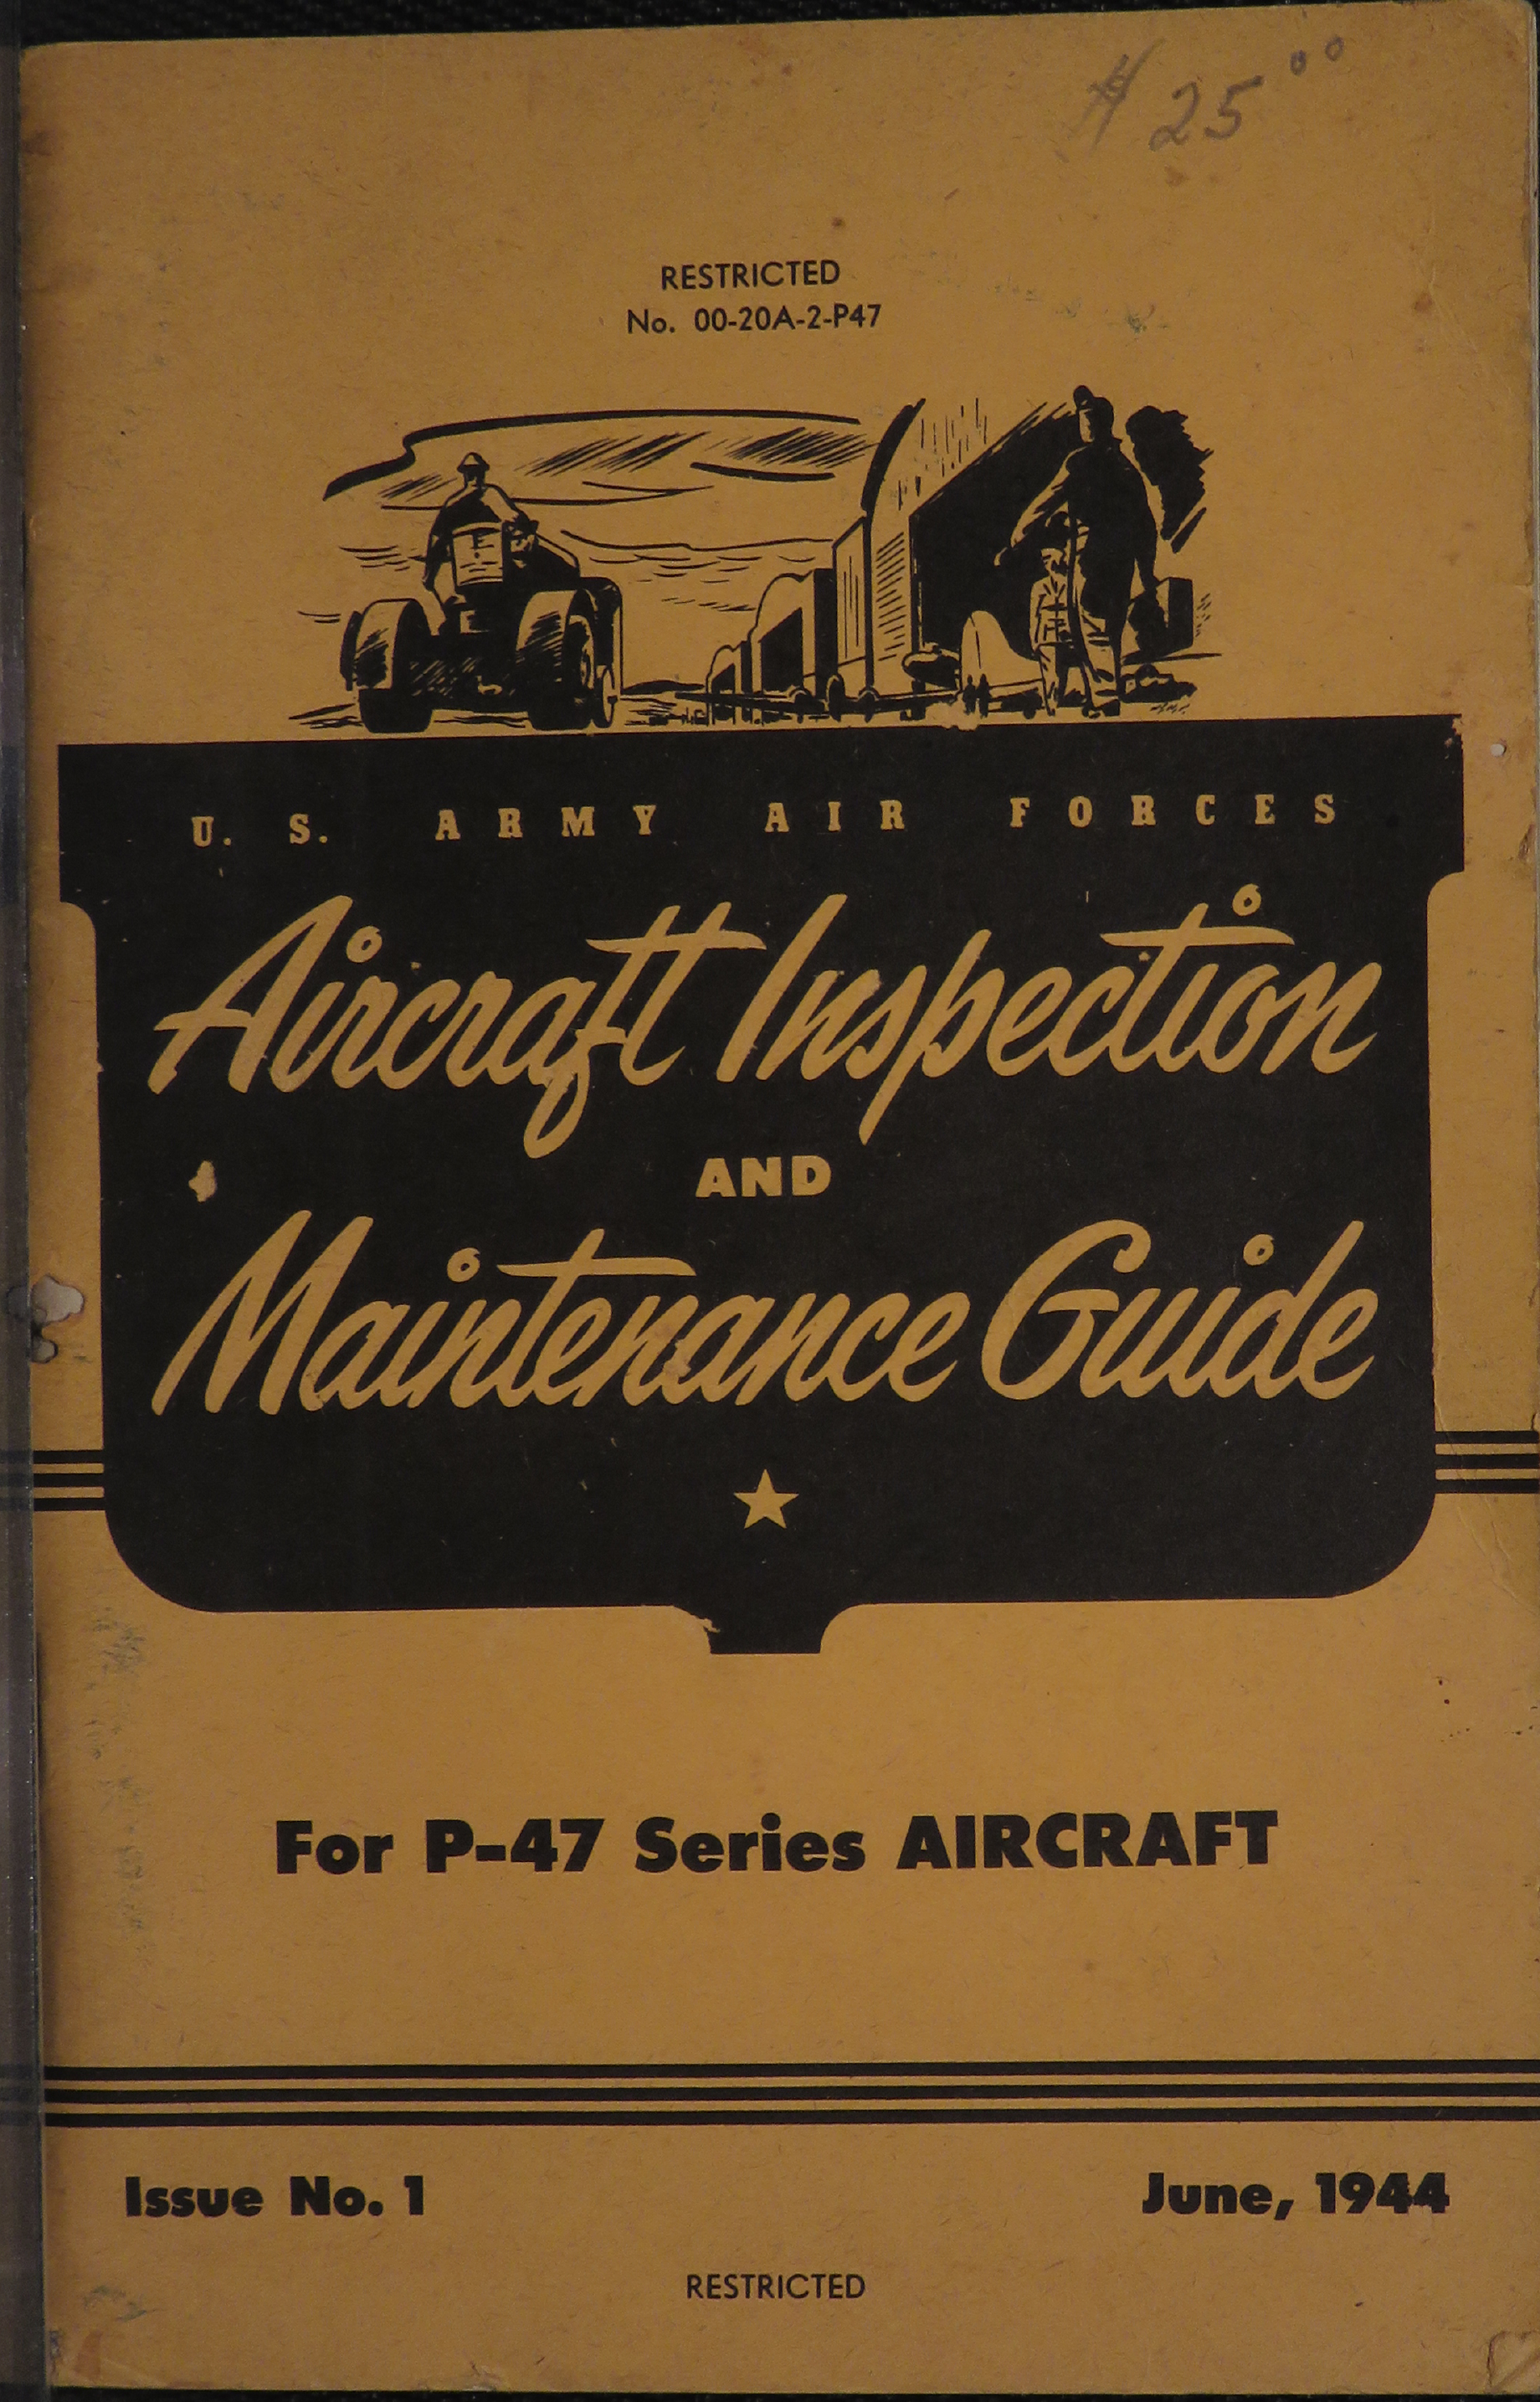 Sample page 1 from AirCorps Library document: Aircraft Inspection and Maintenance Guide for P-47 Series Aircraft